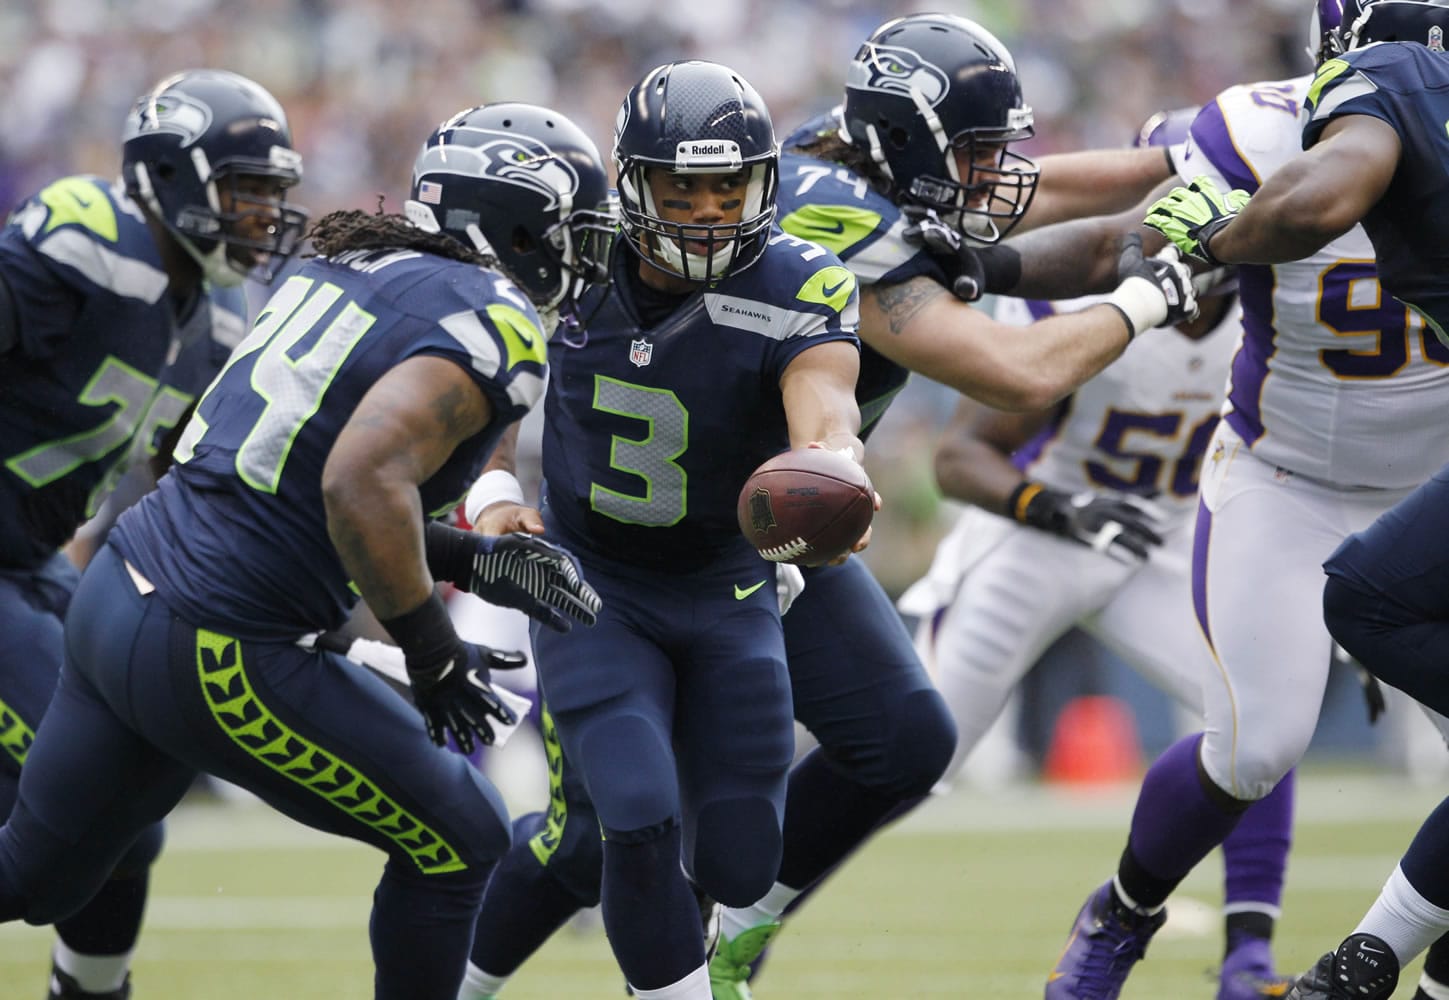 Seattle Seahawks quarterback Russell Wilson hands off to Marshawn Lynch (24) during the first half of an NFL football game against the Minnesota Vikings, Sunday, Nov. 4, 2012, in Seattle.